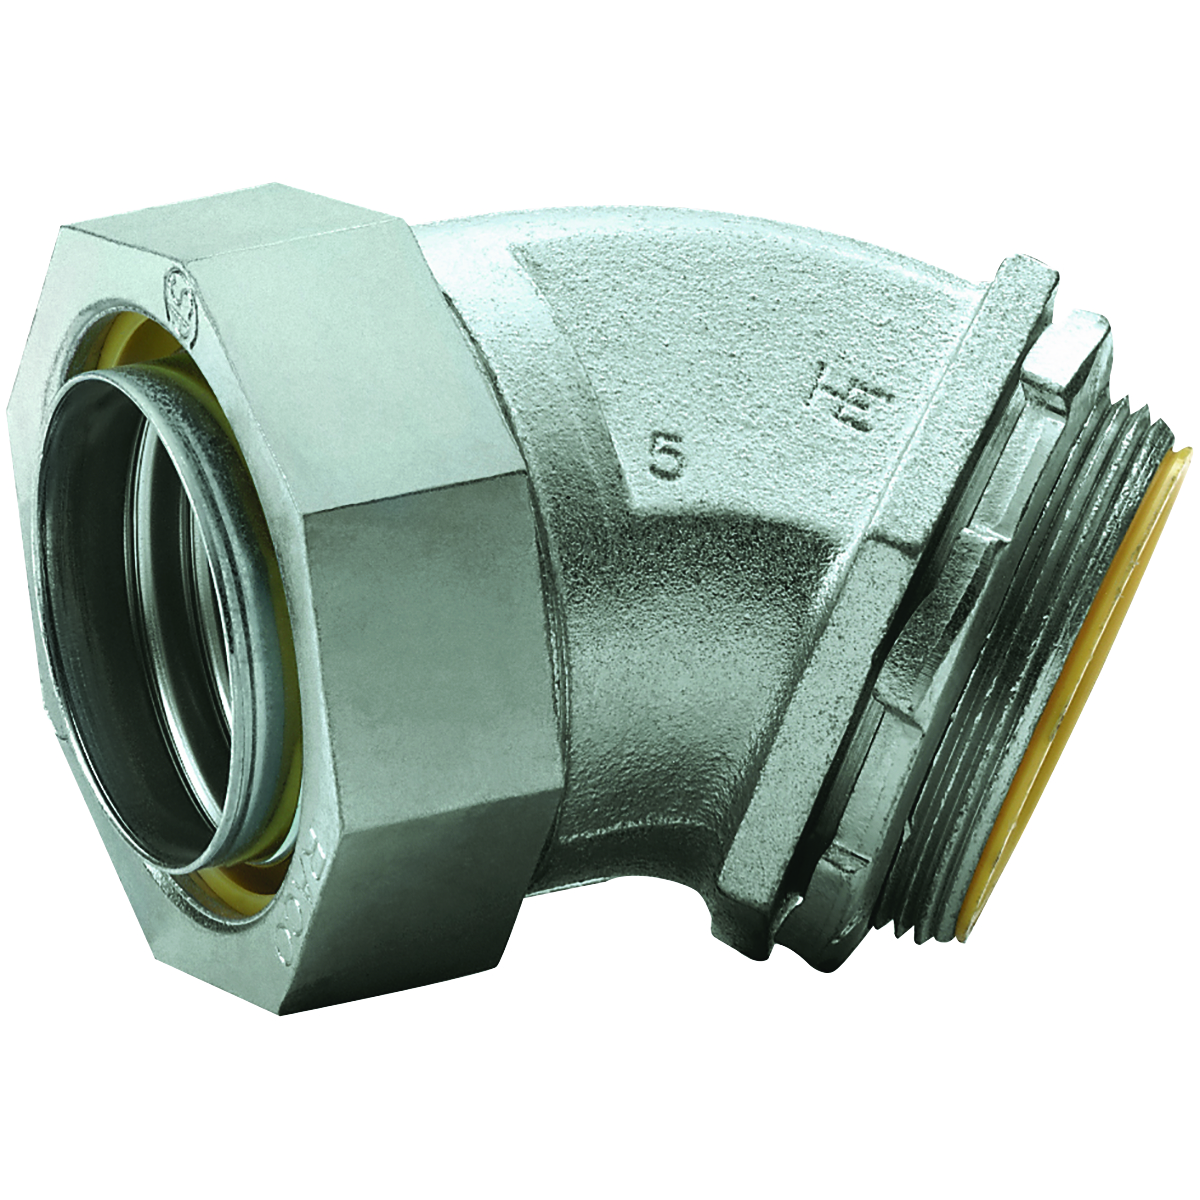 K SERIES FITTINGS - LIQUIDTIGHT CONNECTORS - 45 DEGREE INSULATED - NPTSIZE 1-1/4 IN